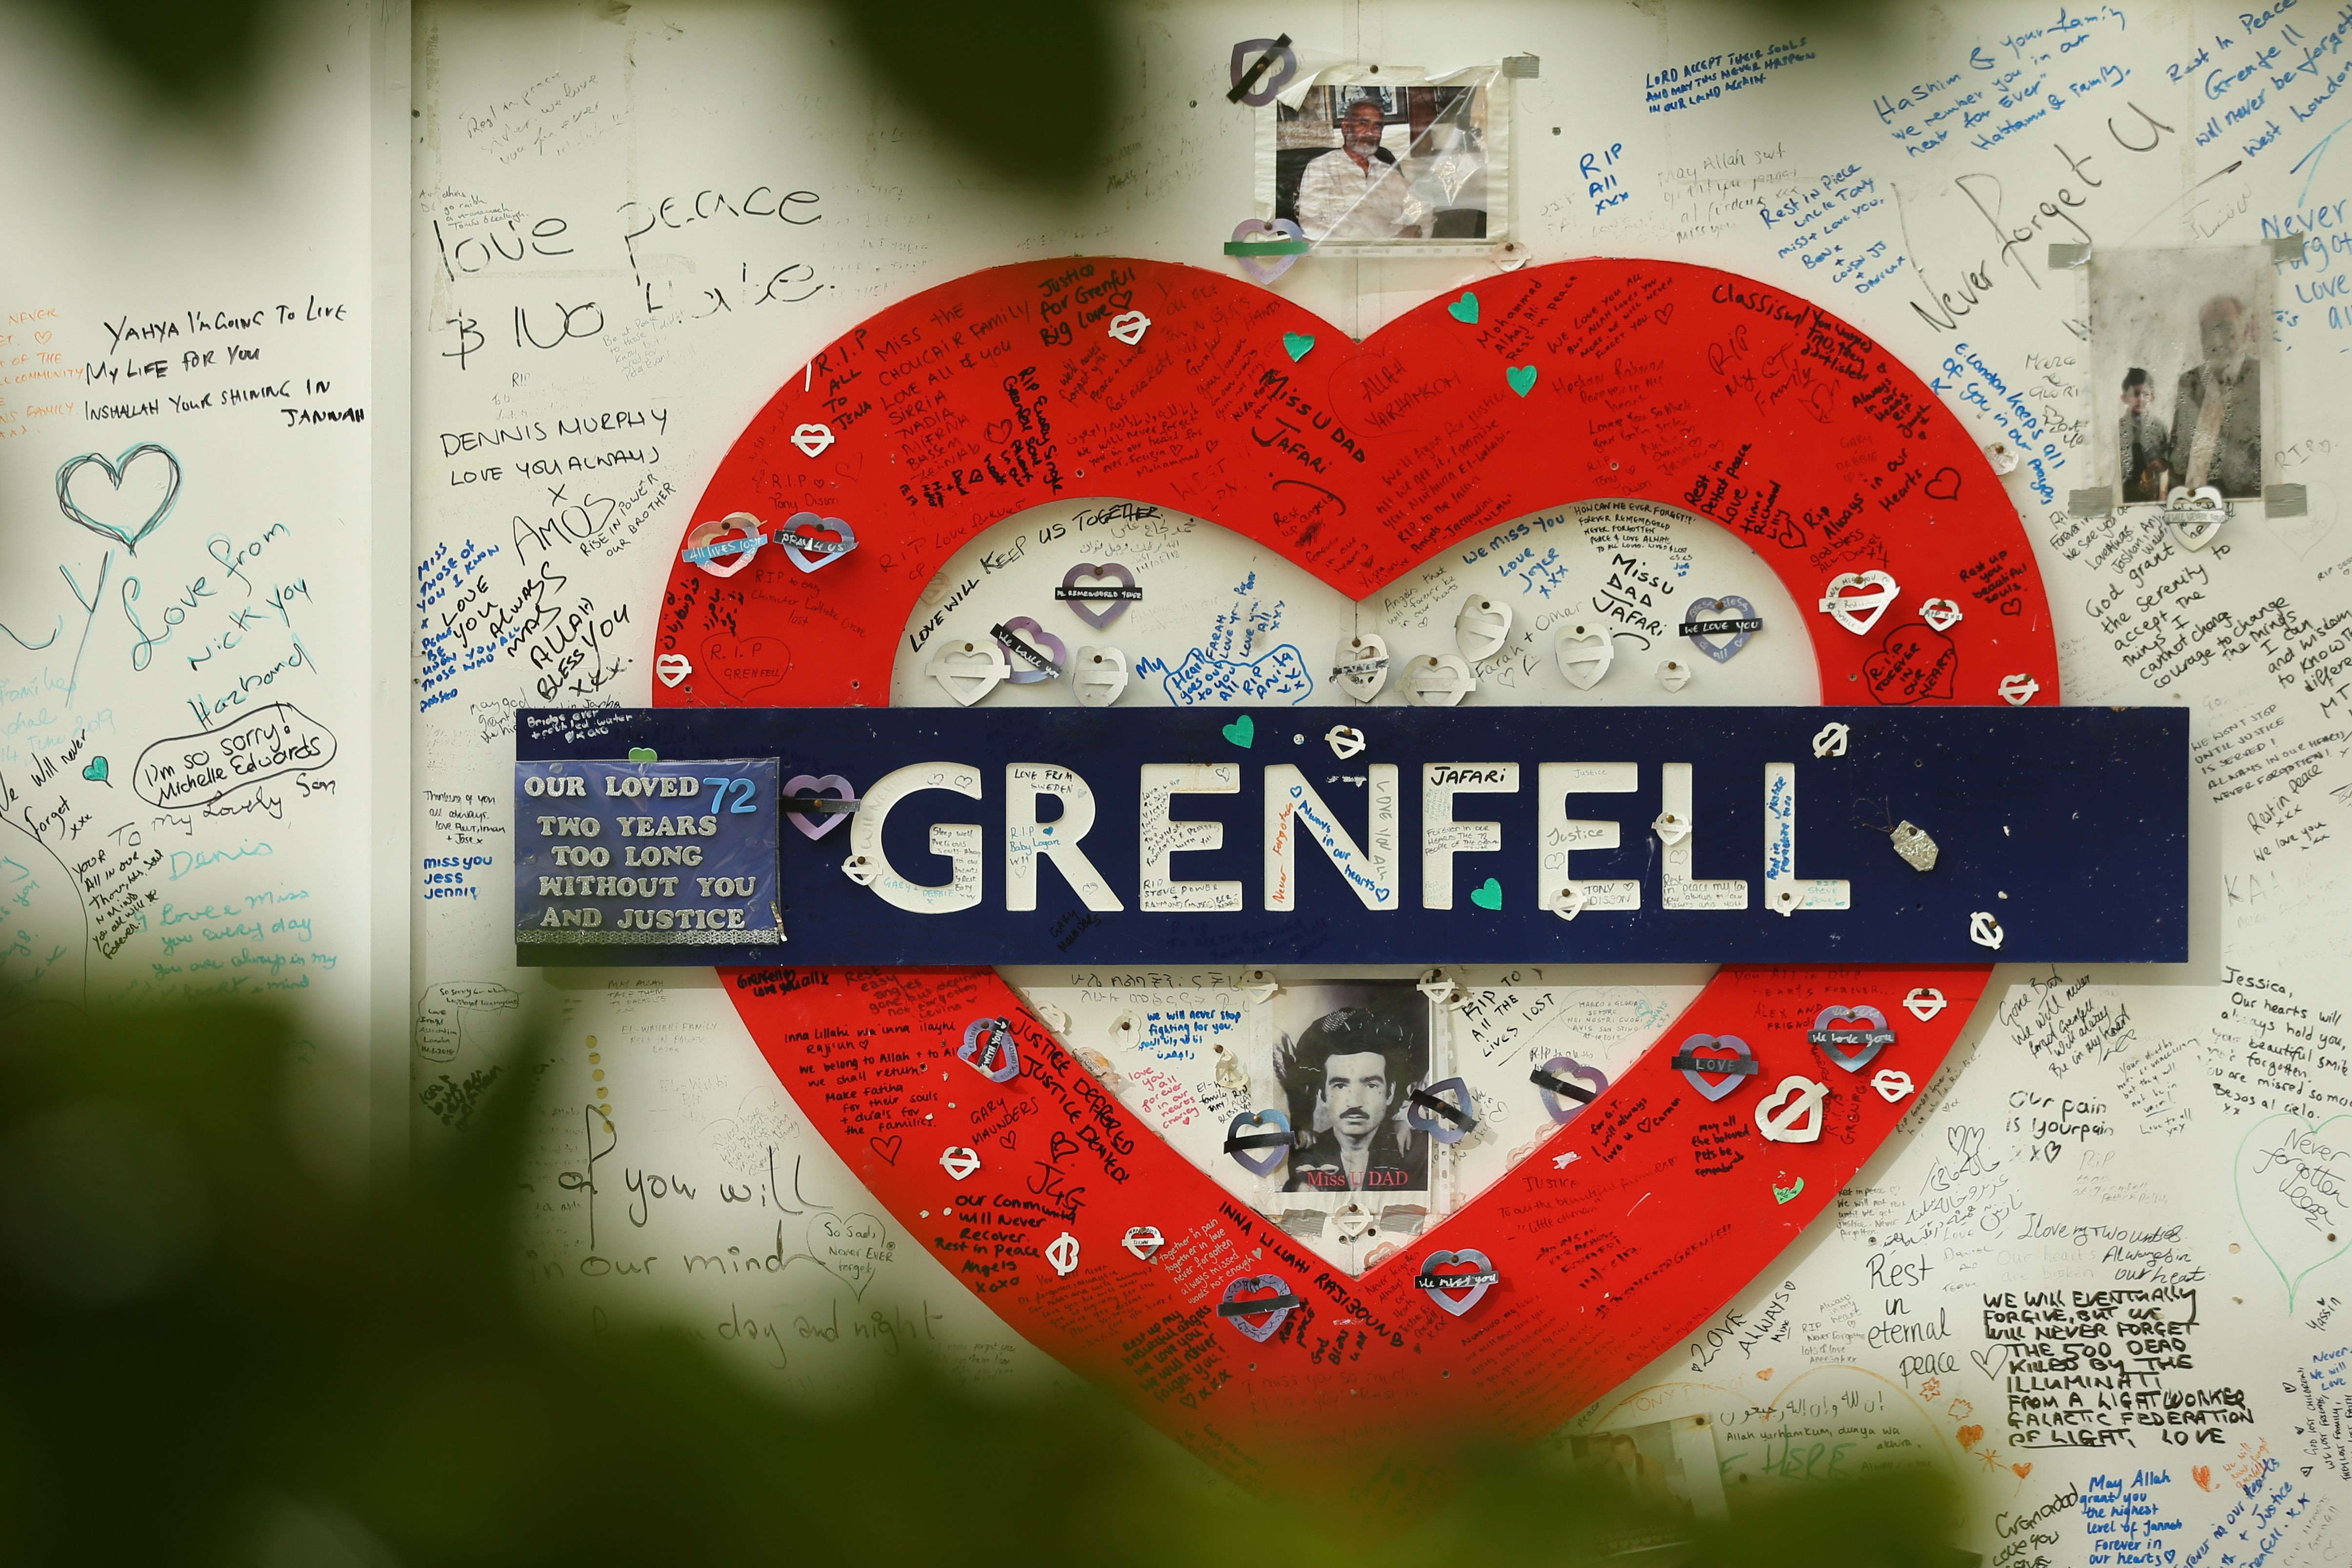 Messages of support are written on a wall surrounding Grenfell Tower in London on Wednesday. Photo: AFP